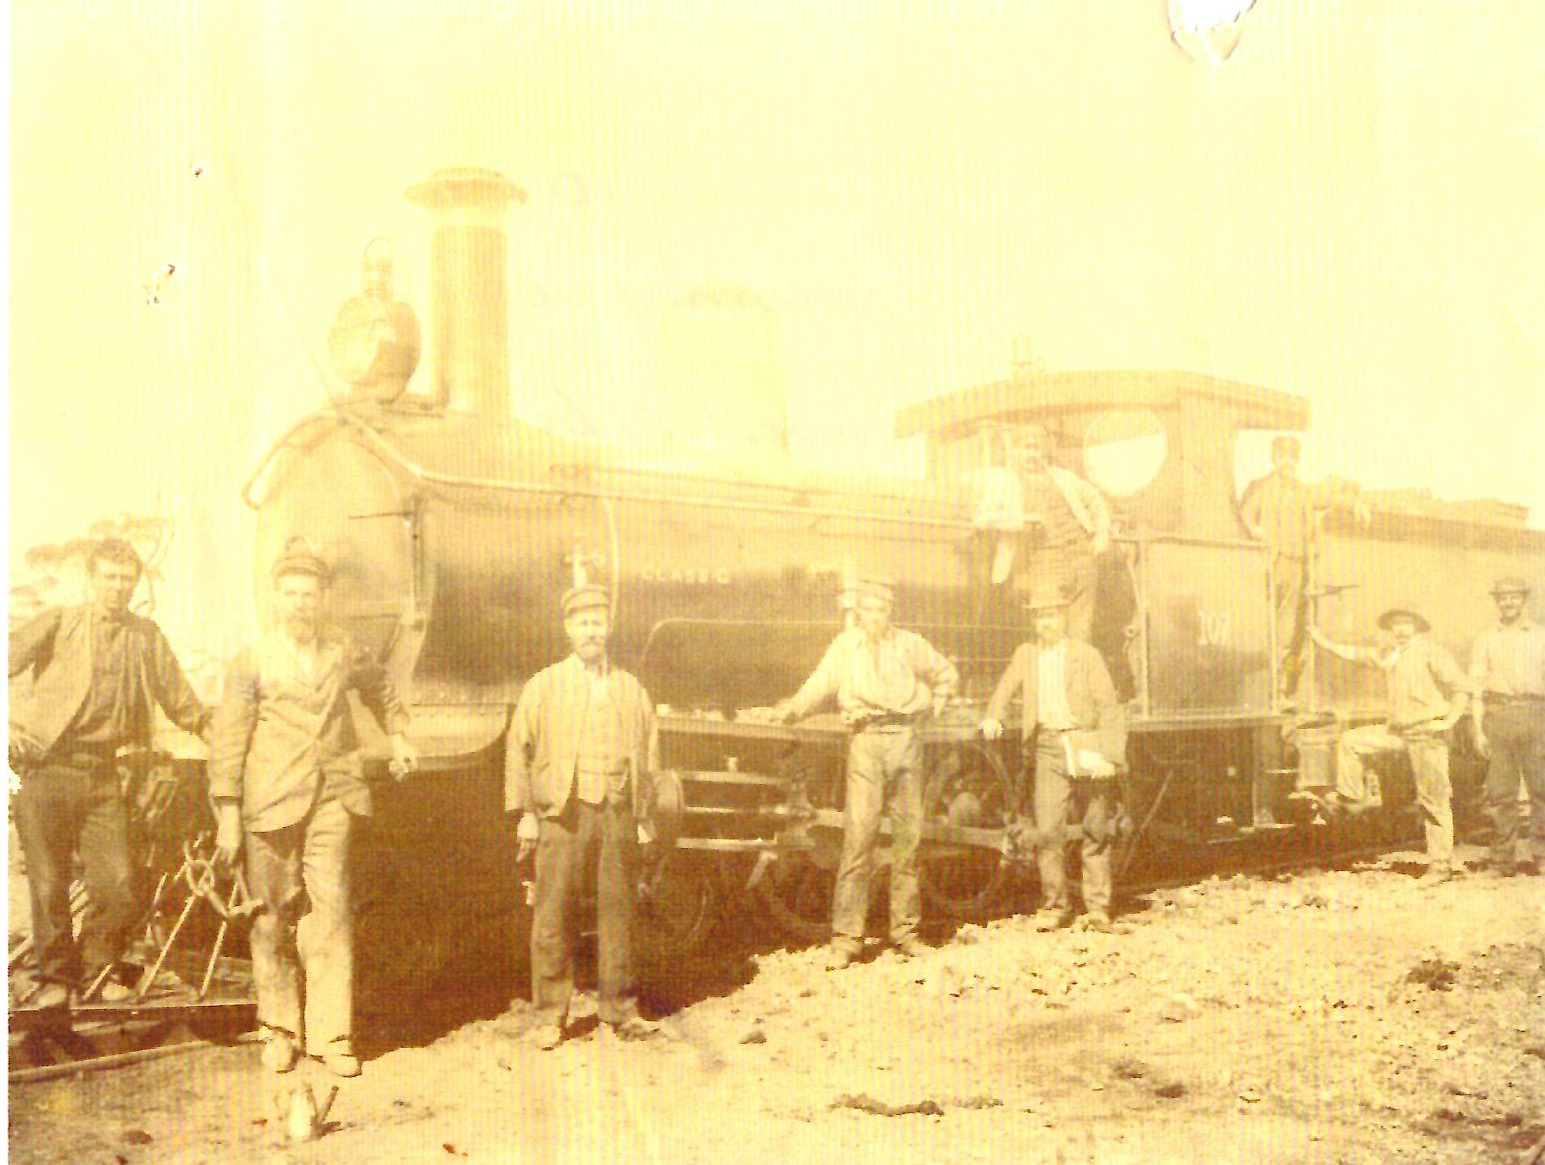 George Taylor's Locomotive, a G Class 107, George is 3rd from left.